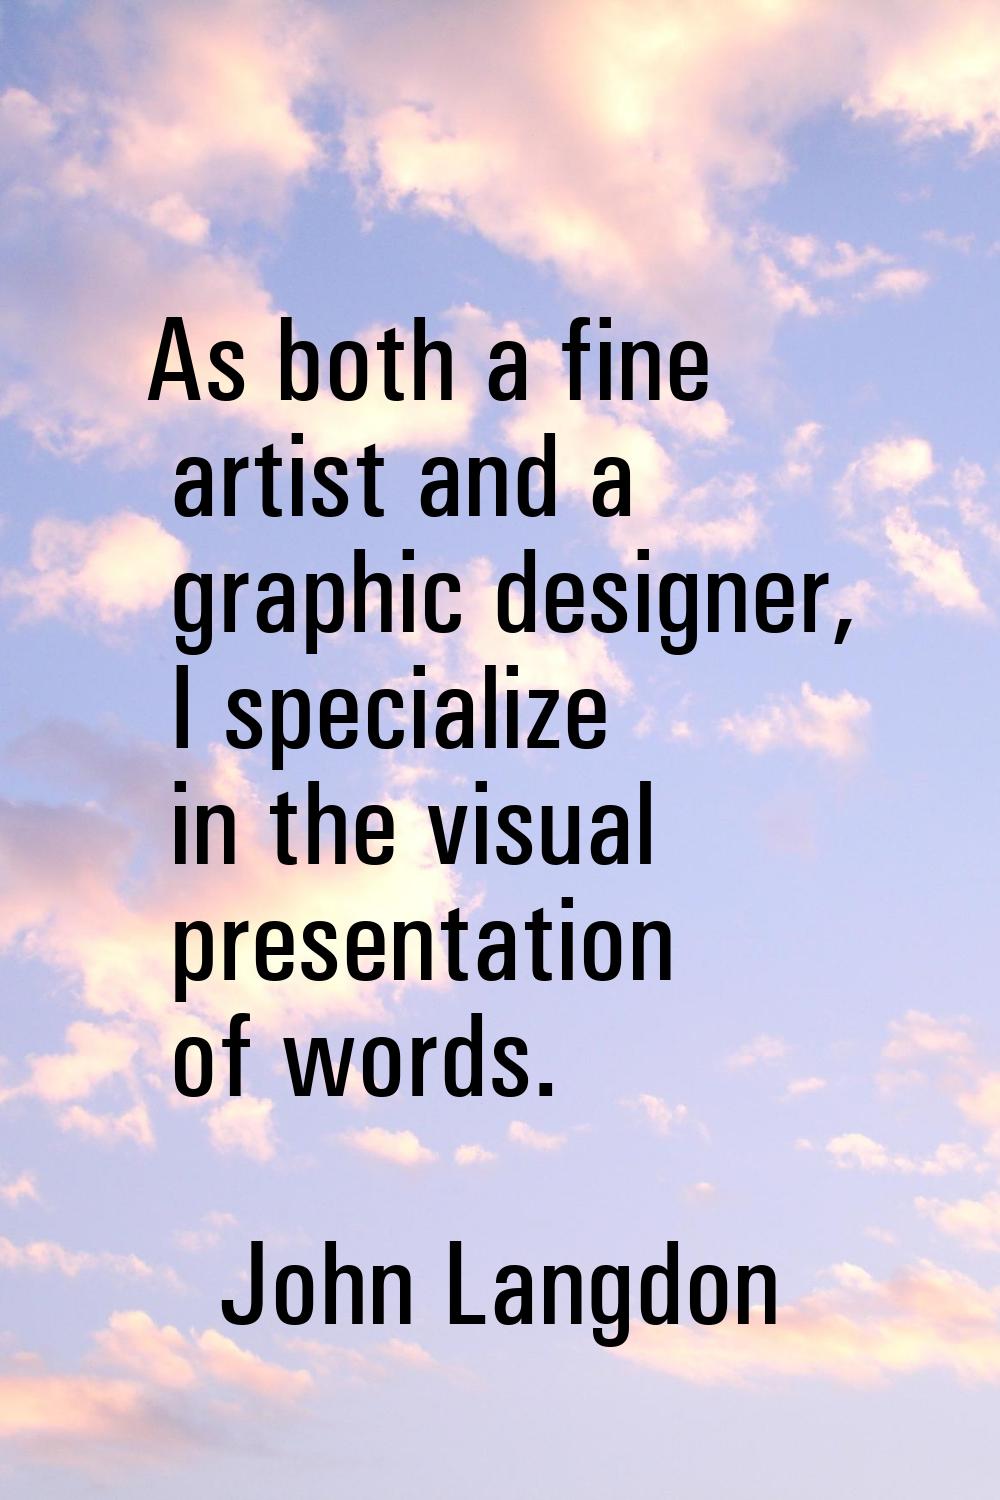 As both a fine artist and a graphic designer, I specialize in the visual presentation of words.